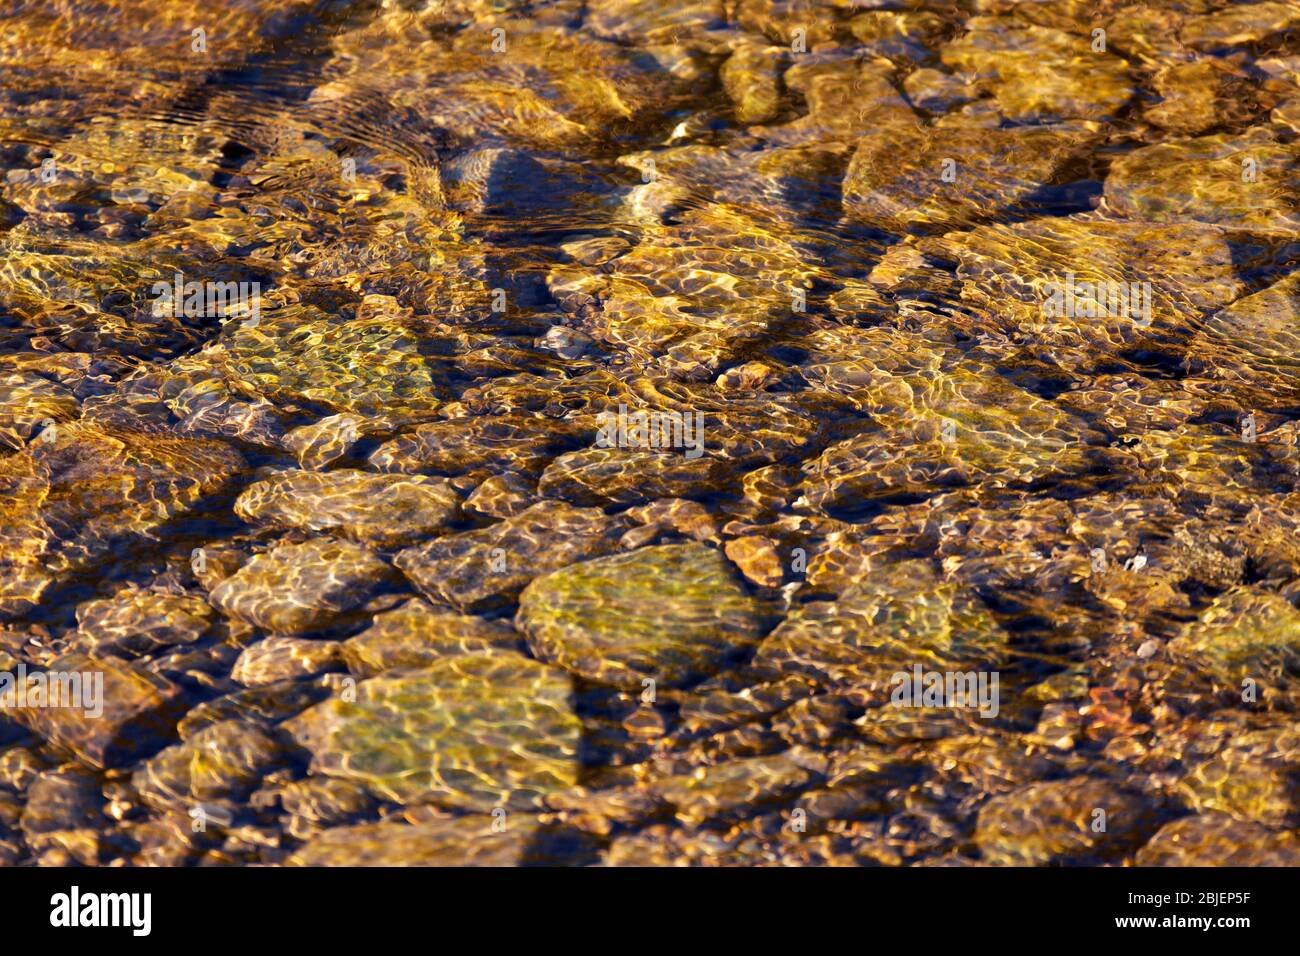 Rocks in a stream at Watergate Park in Gateshead, England. Sunshine refracts through the rippled surface of the waterway. Stock Photo